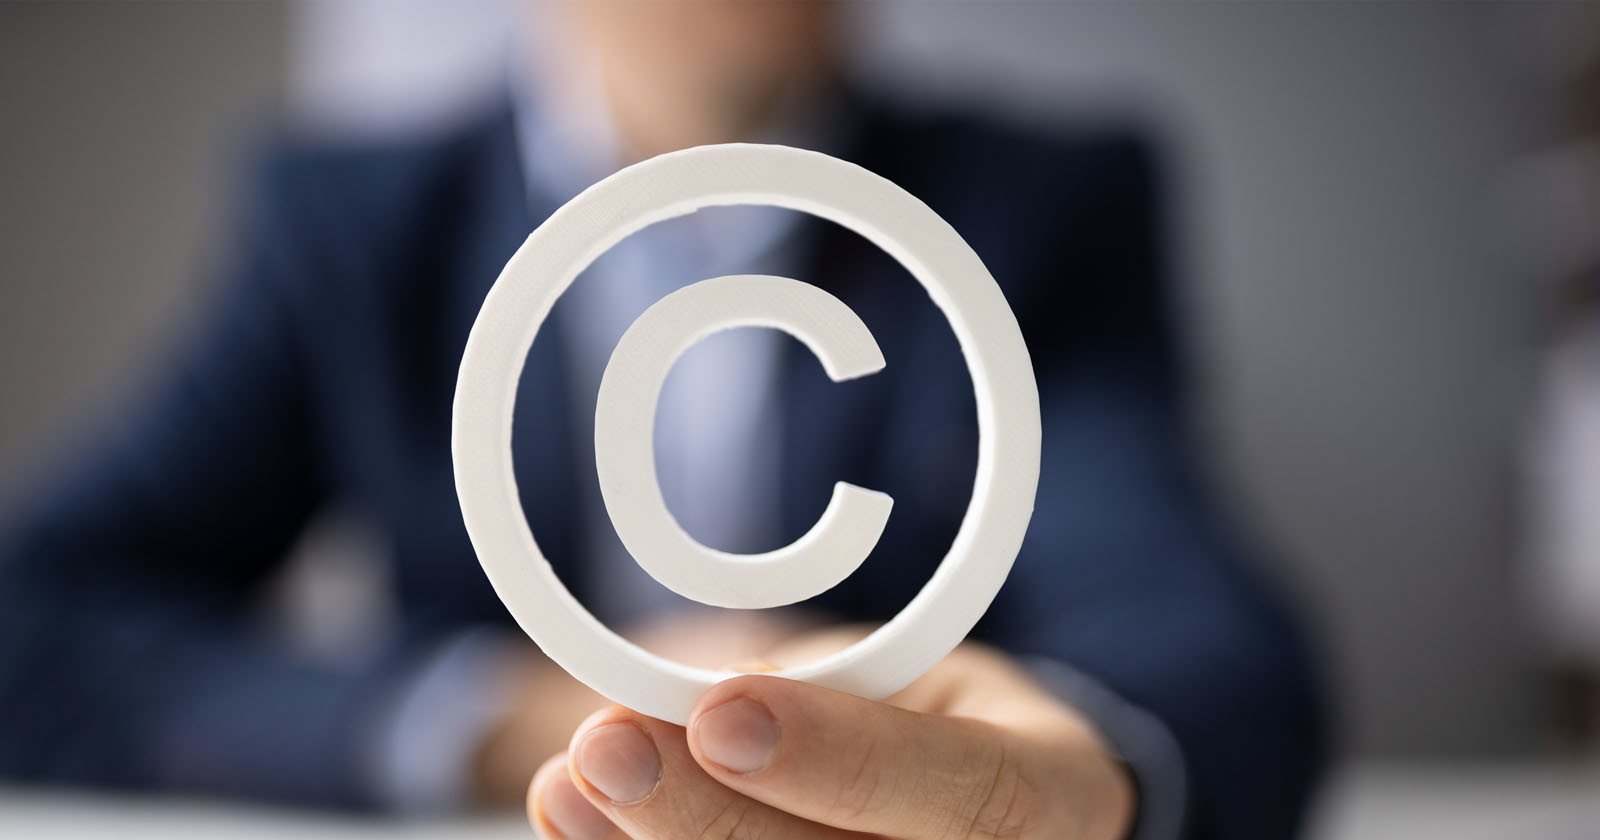  dreamstime takes alternative approach copyright theft 